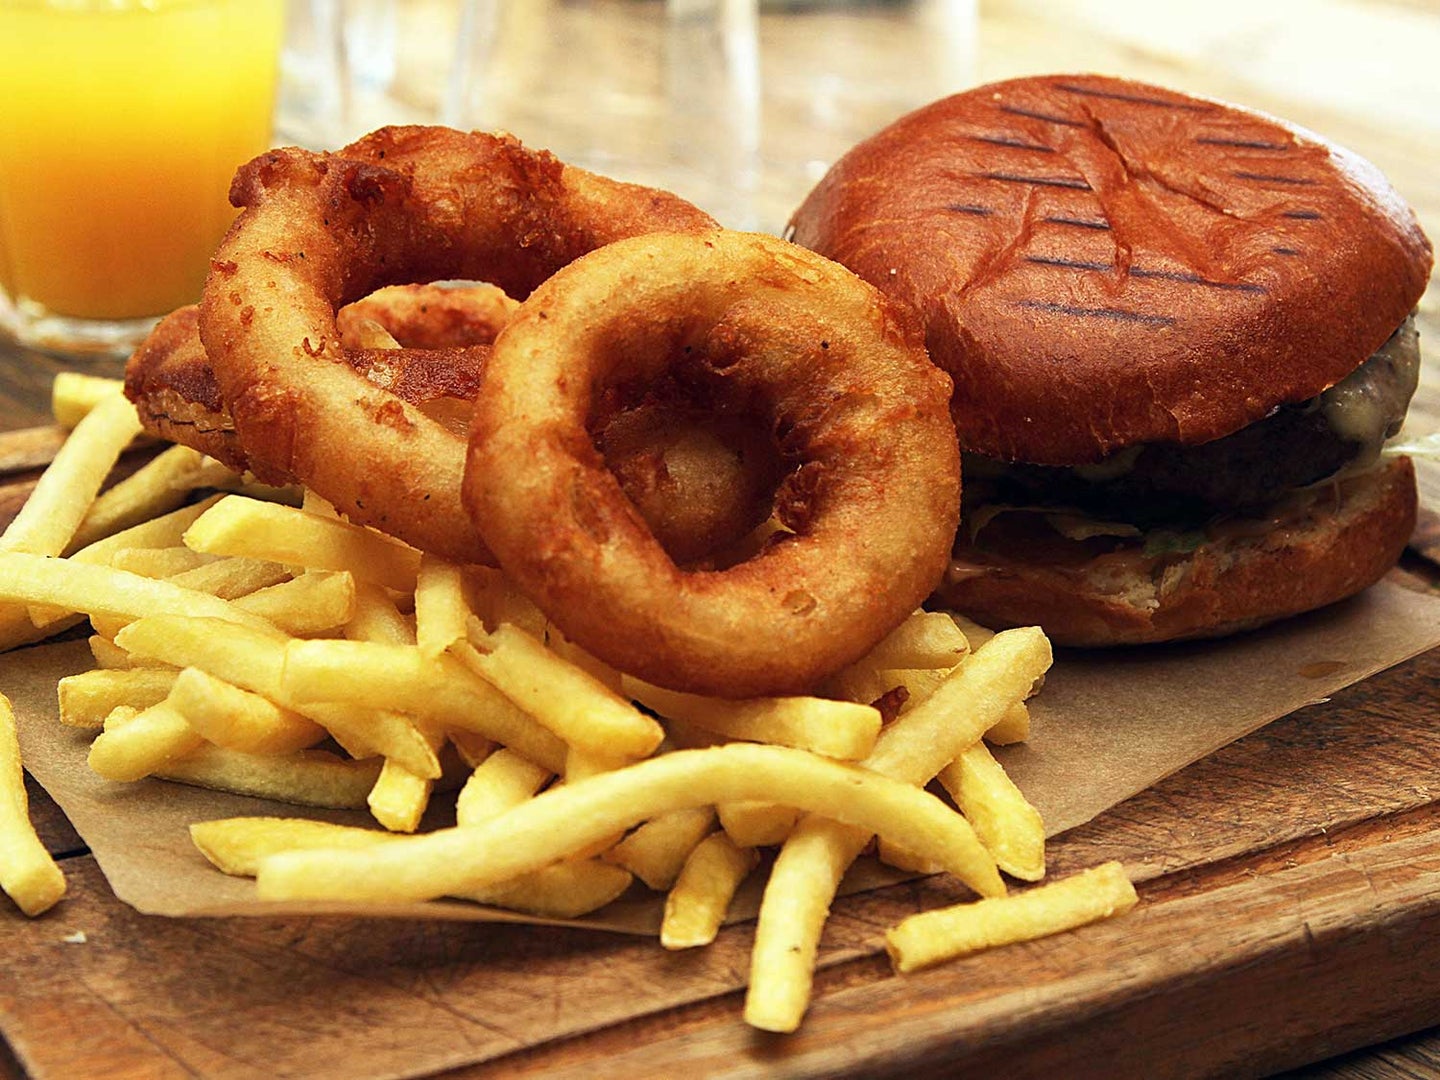 Burgers, fries, and onions rings